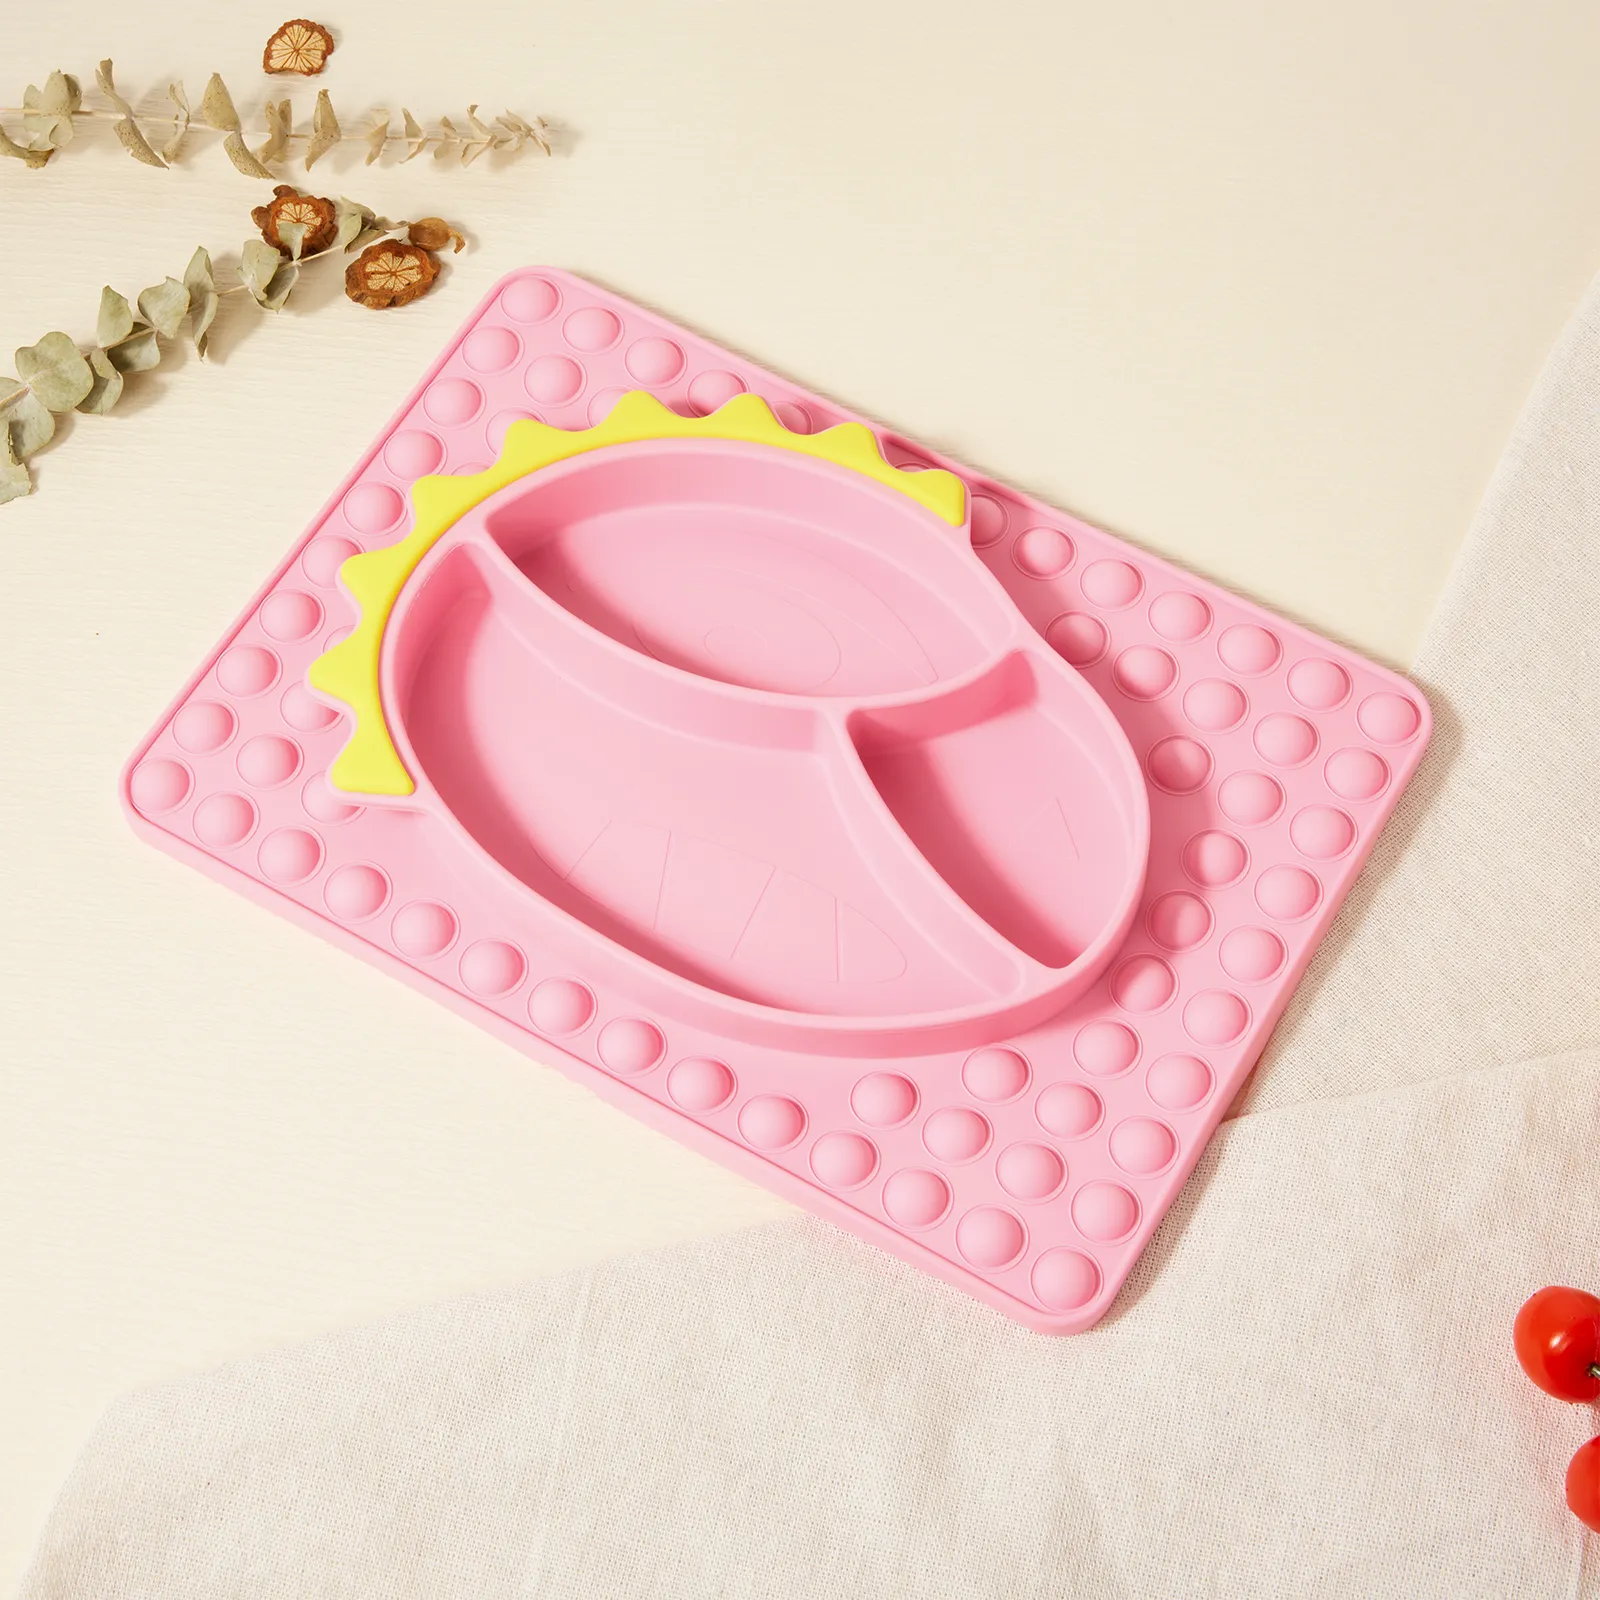 Silicone Suction Dinosaur Plate - Bubble Design for Baby's Mealtime